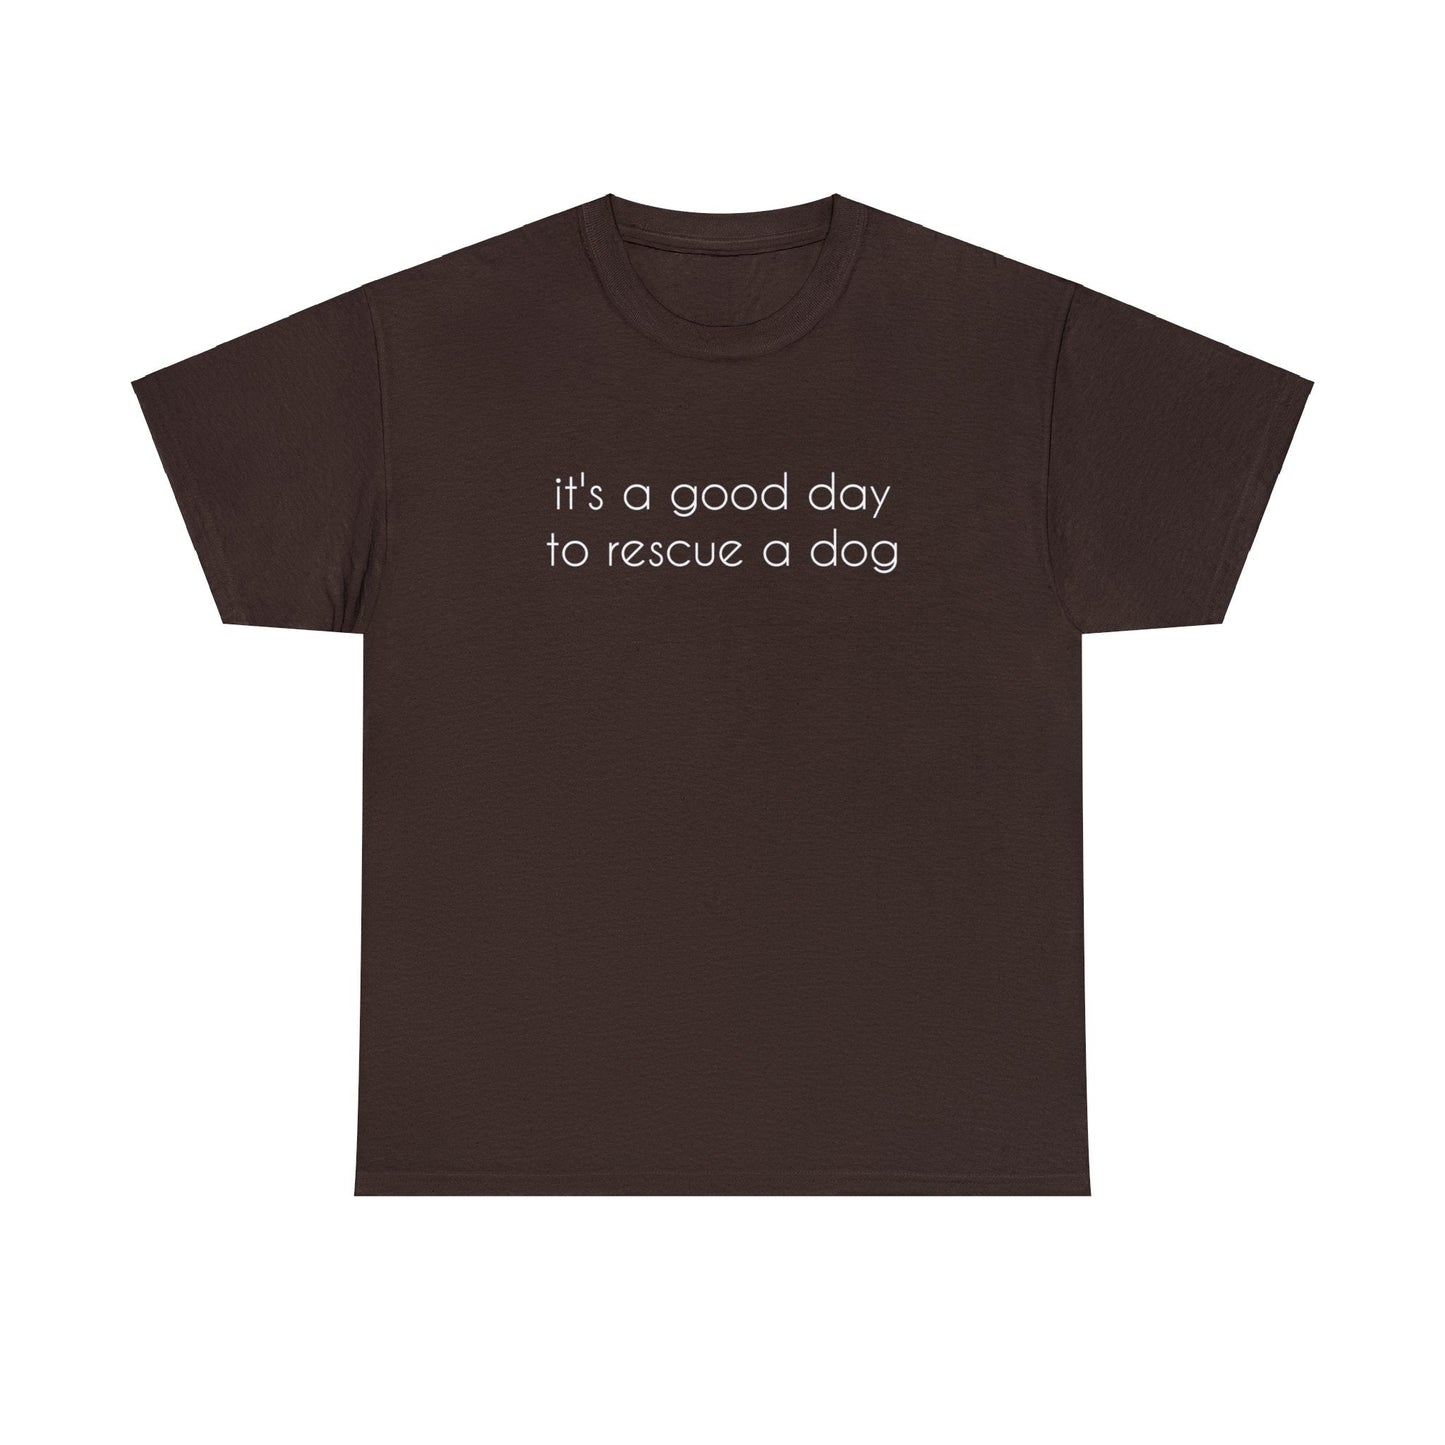 It's A Good Day To Rescue A Dog | Text Tees - Detezi Designs-10864584685042533577